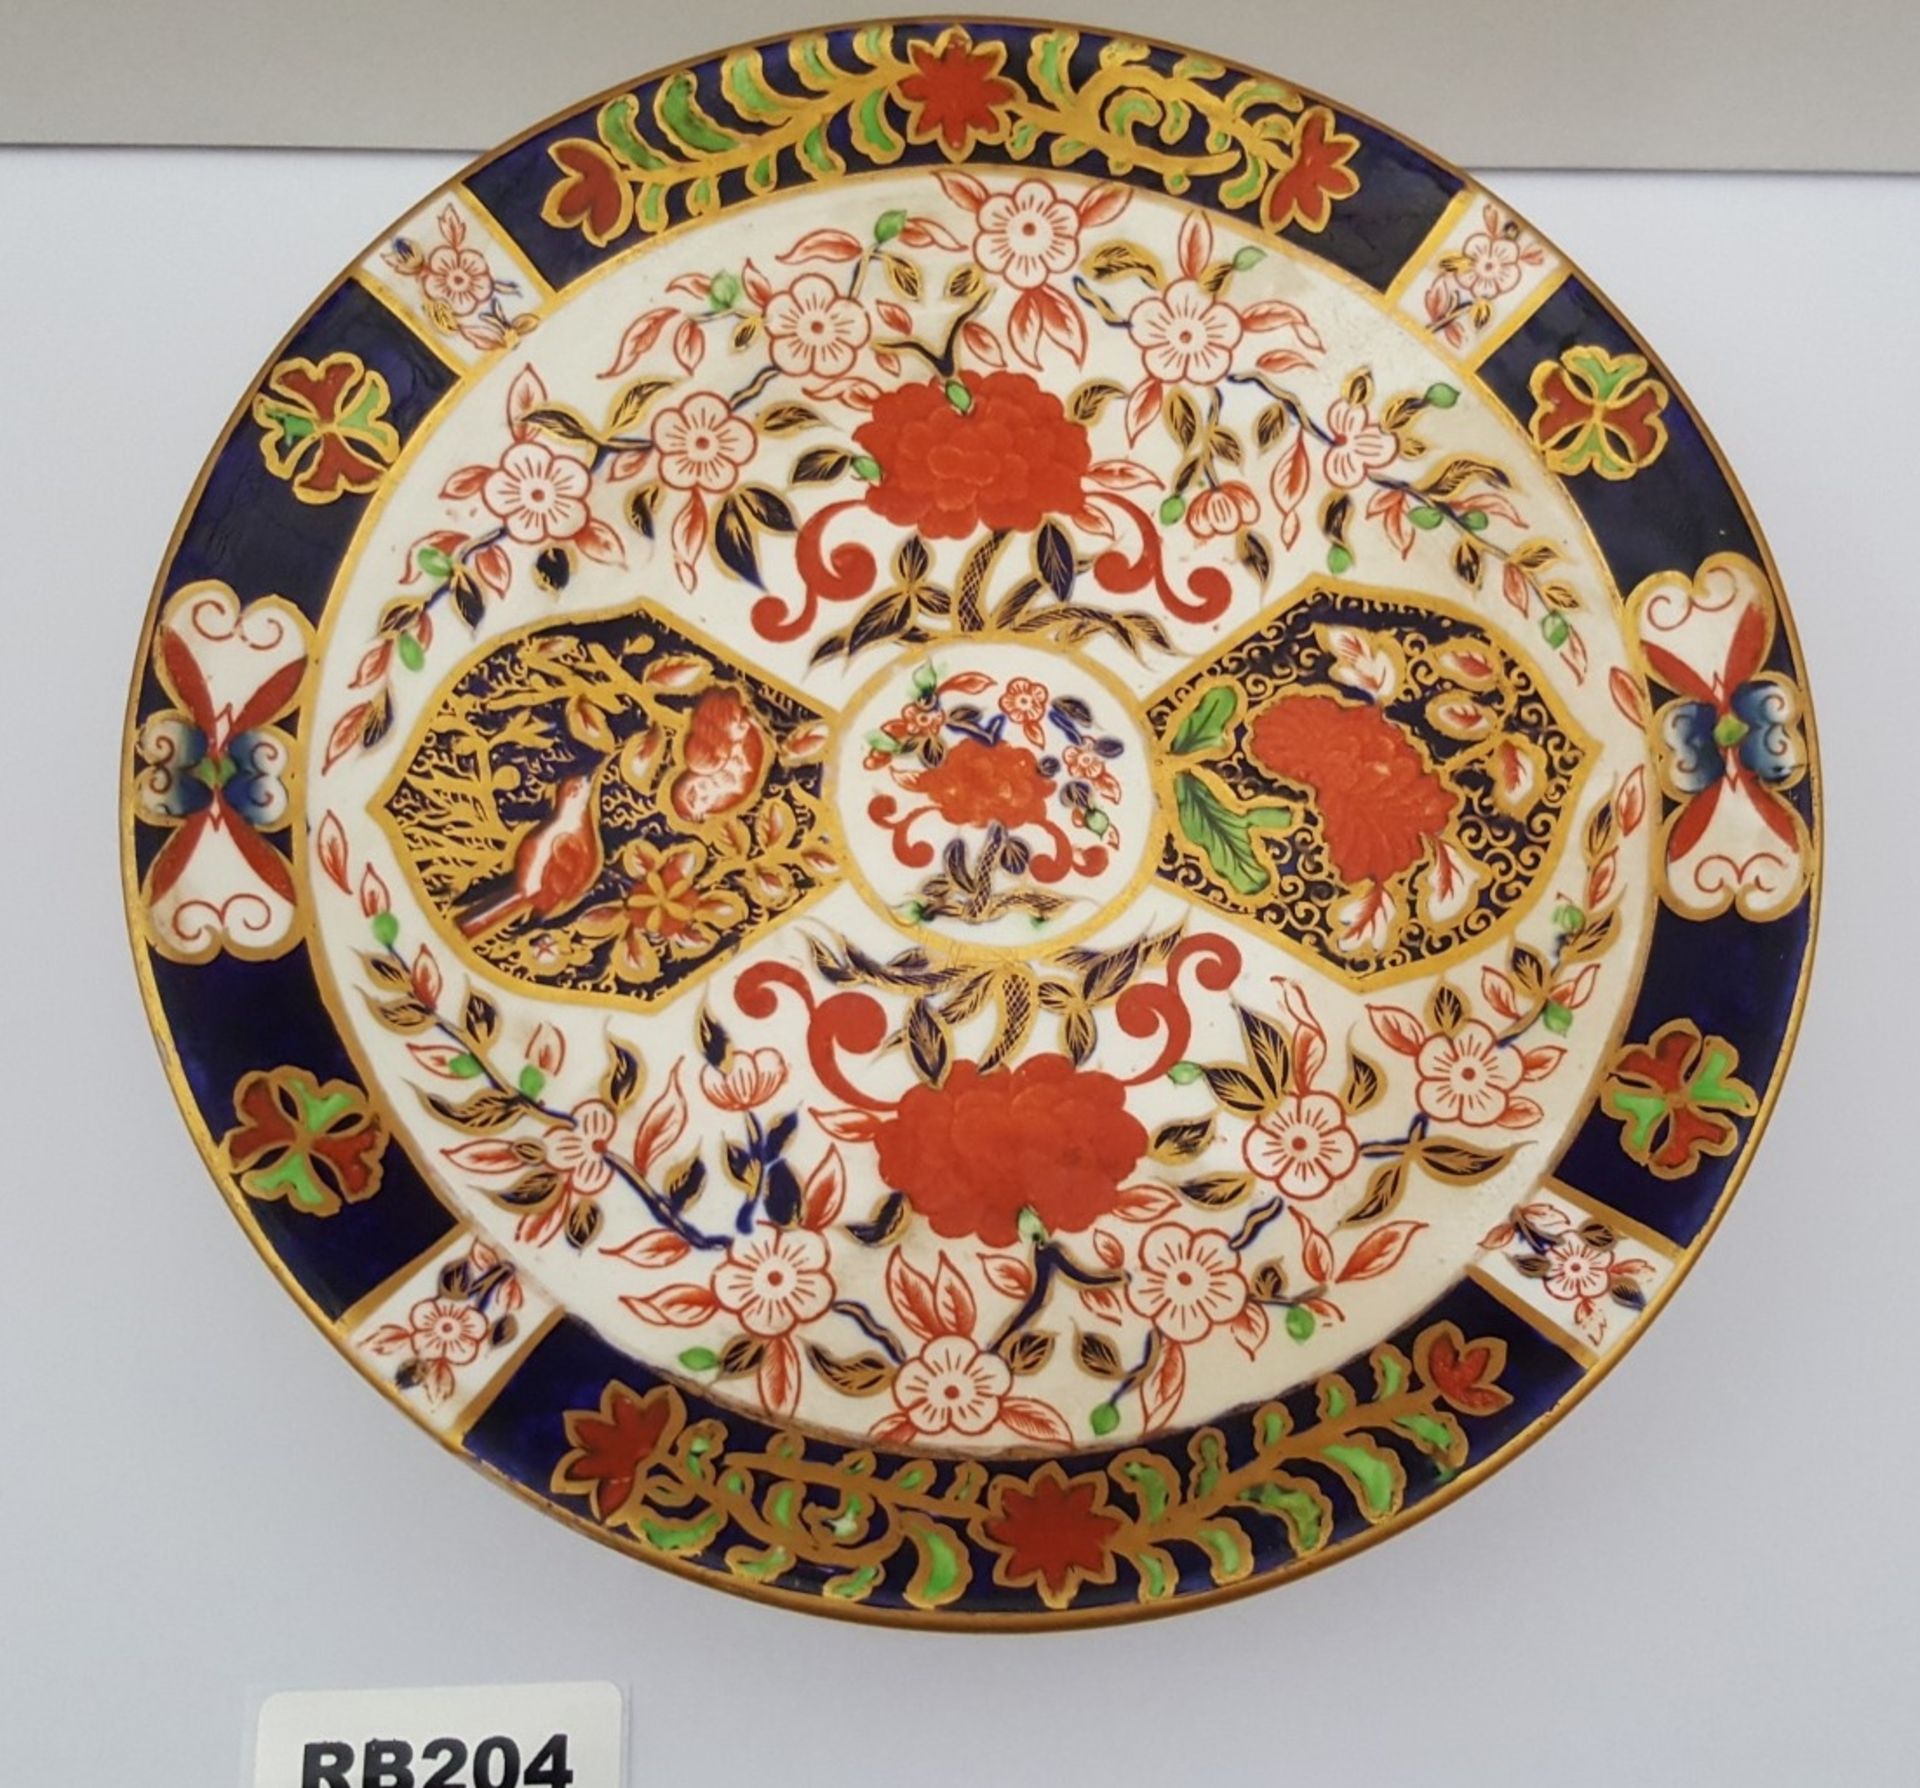 1 x RARE ROYAL CROWN DERBY IMARI PATTERN 198 CHINA PLATE - Ref RB204 I - Image 4 of 6